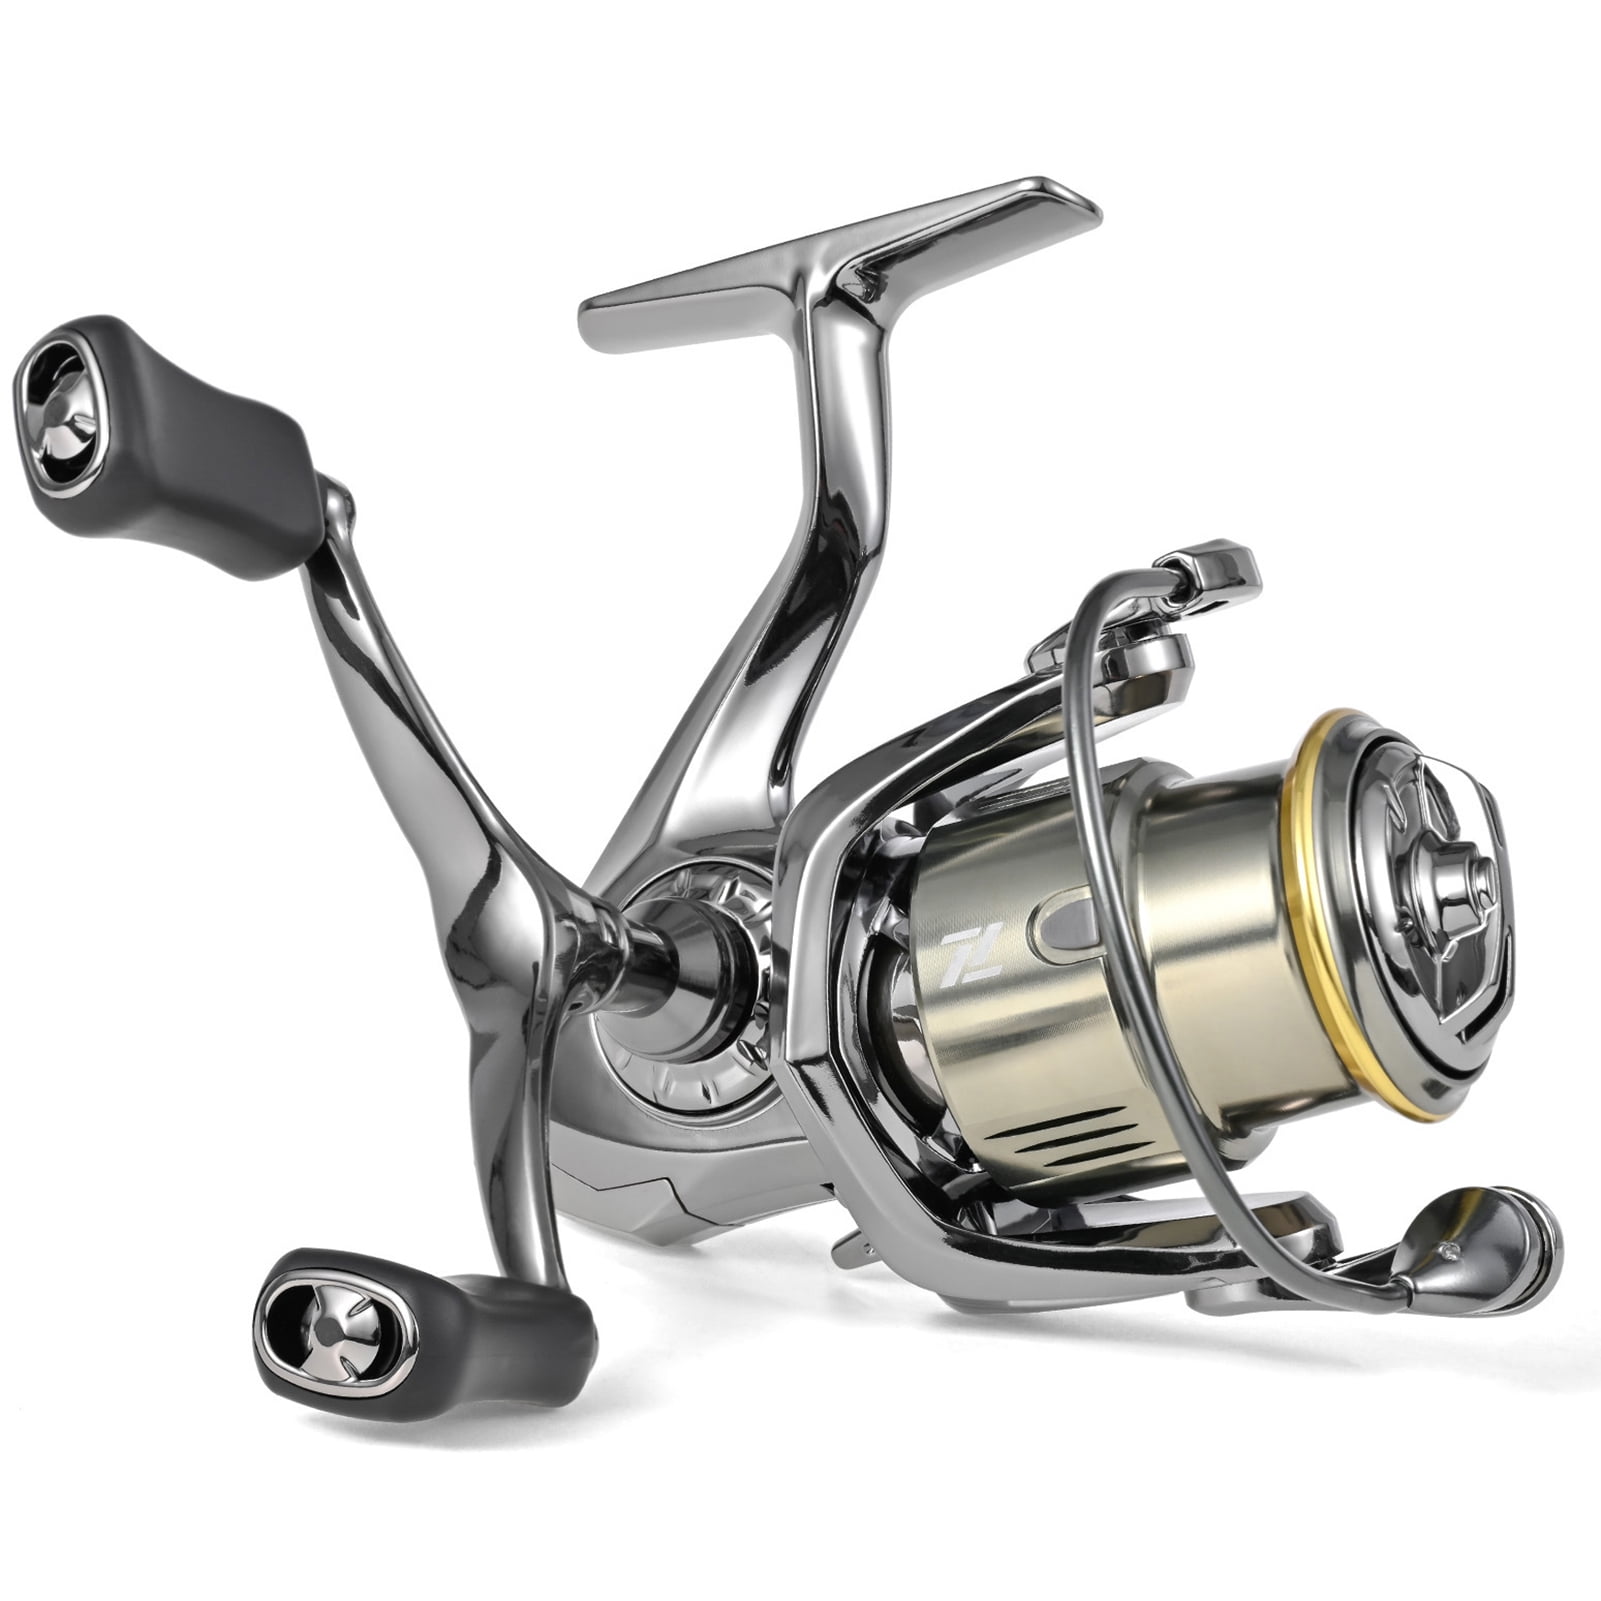 LEO FISHING Spinning Reel, Dual Handle, 5.2:1 Gear Ratio, 7+1 Bearing -  Smooth Retrieve and Precise Casting - Great for Freshwater and Light  Saltwater Fishing 